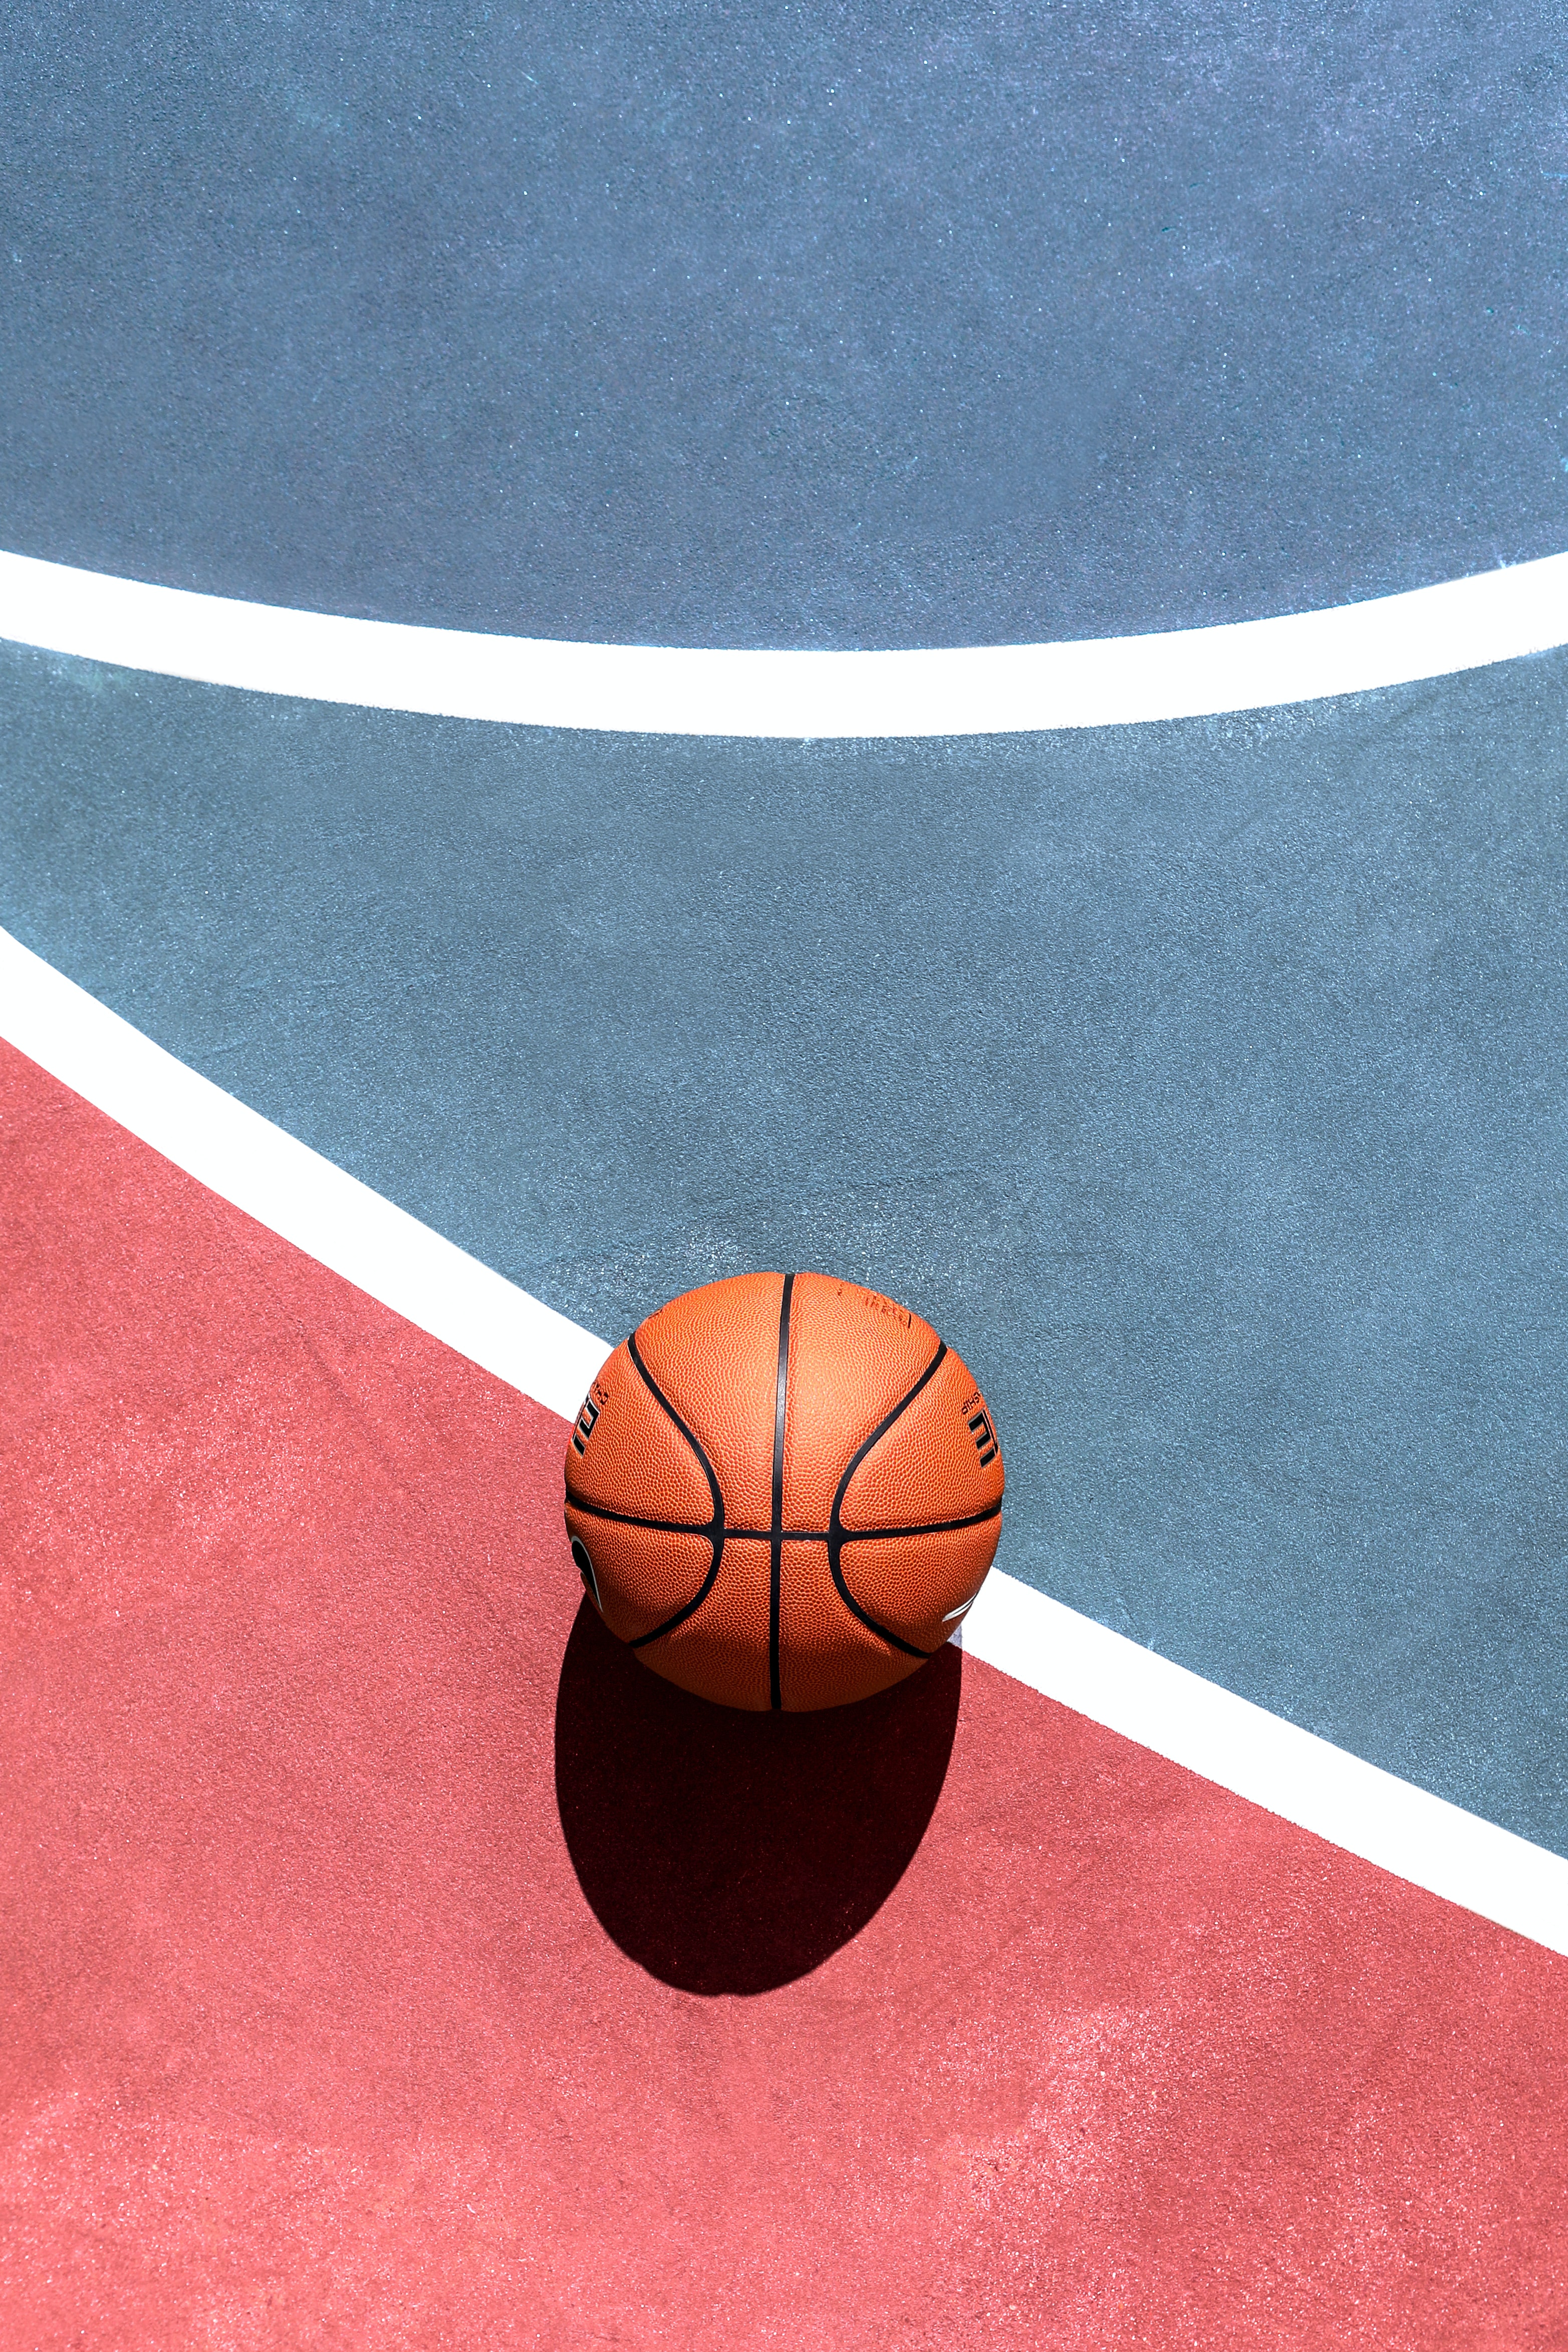 60597 download wallpaper basketball, sports, ball screensavers and pictures for free